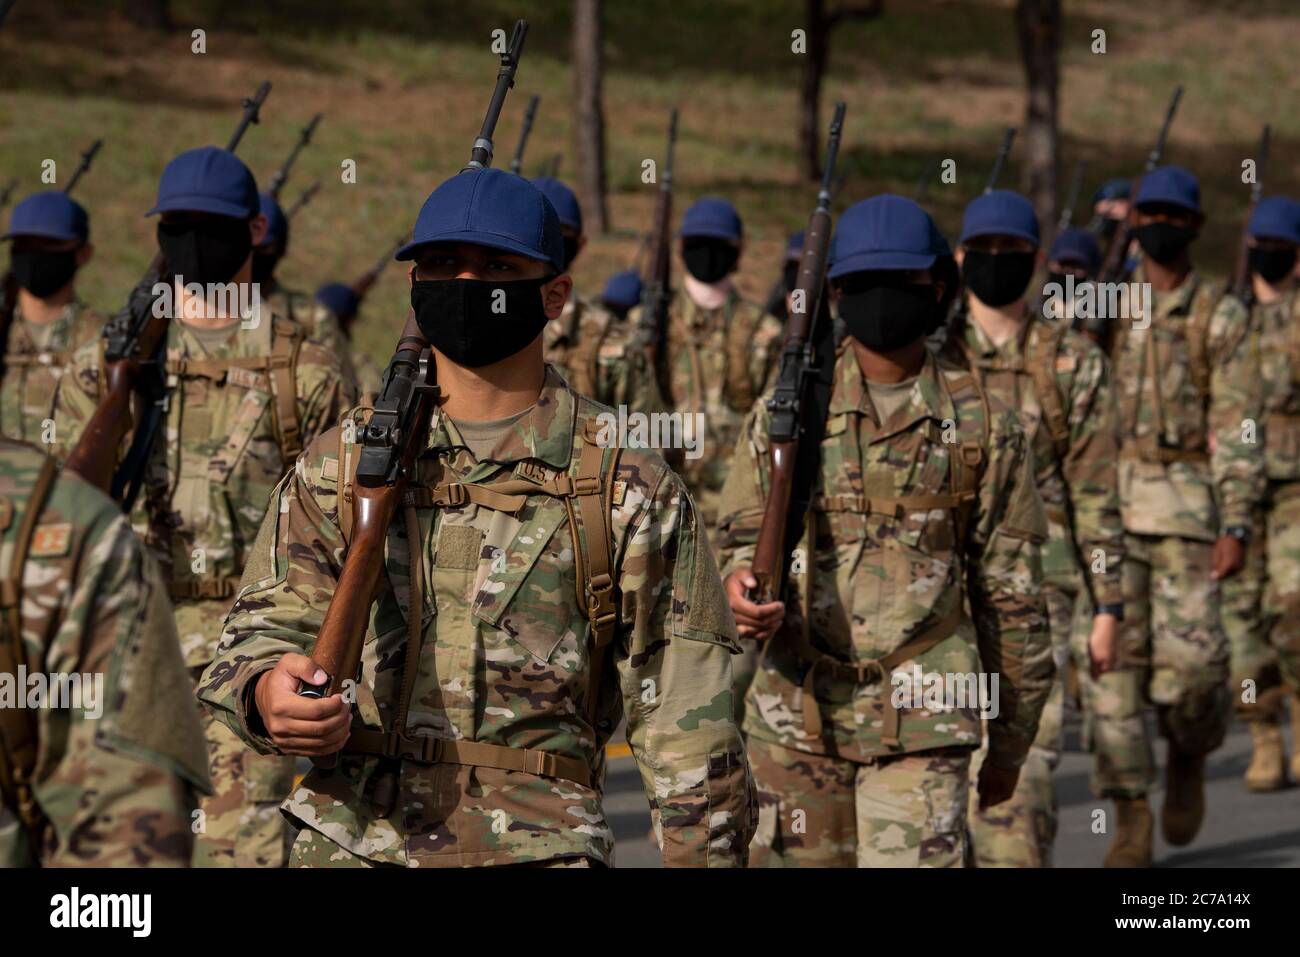 U.S. Air Force Academy cadets from the class of 2024 March Out to Jacks Valley wearing PPE and social distancing, to begin Basic Cadet Training at the Air Force Academy July 13, 2020 in Colorado Springs, Colorado. Stock Photo